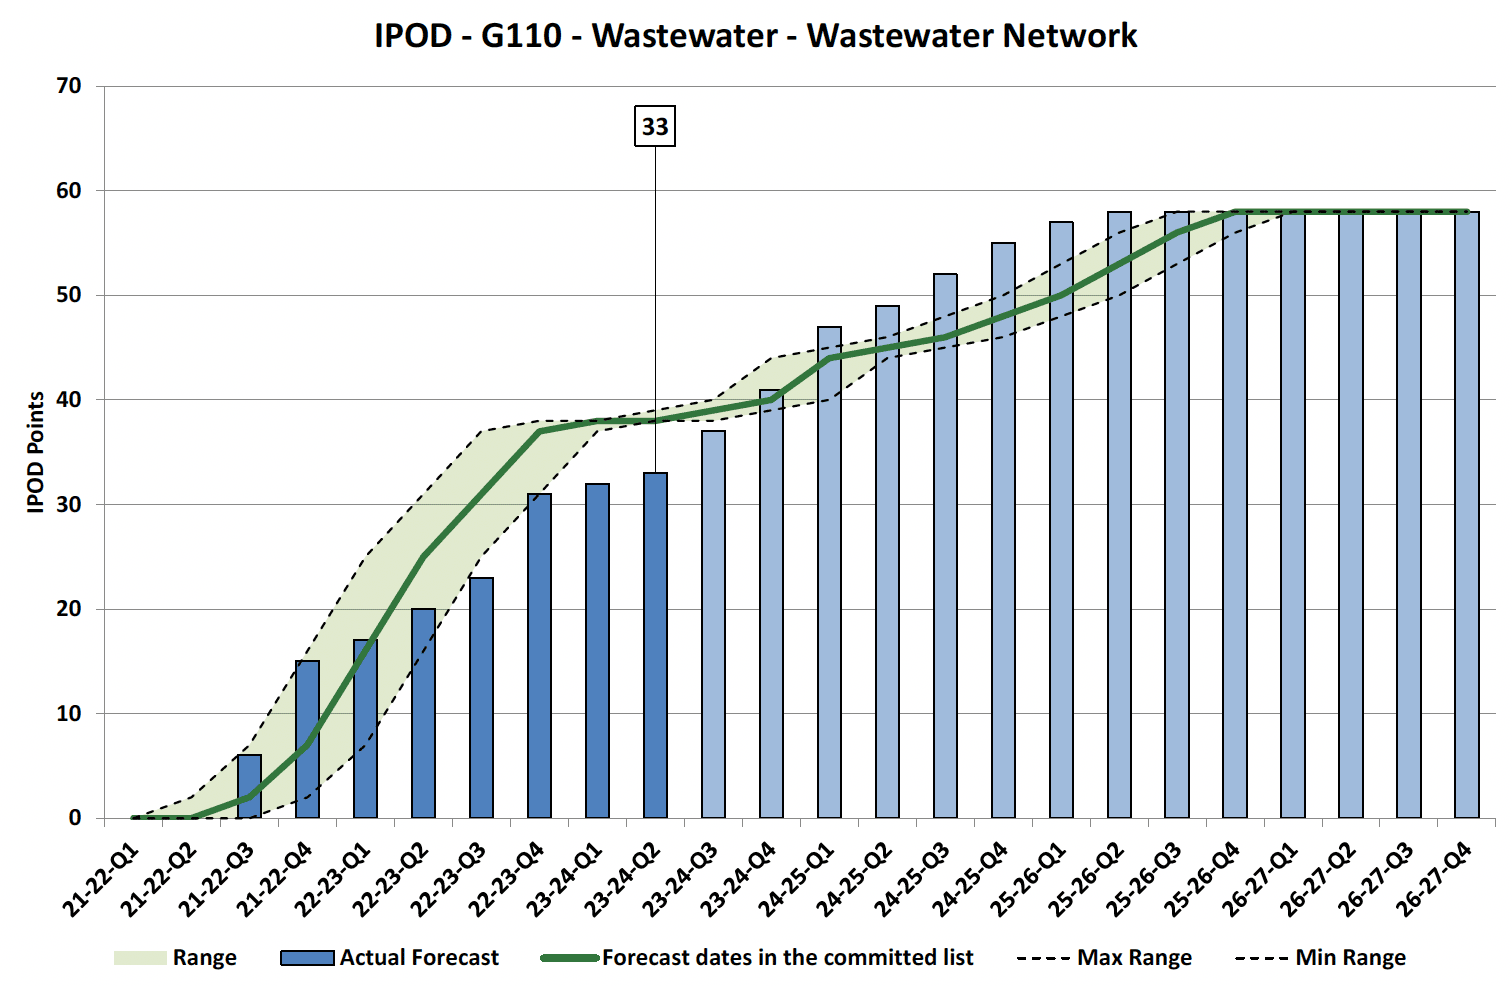 Chart showing IPOD points achieved or forecast for Financial Completion milestone against target range for Wastewater Network Projects in Wastewater Portfolio